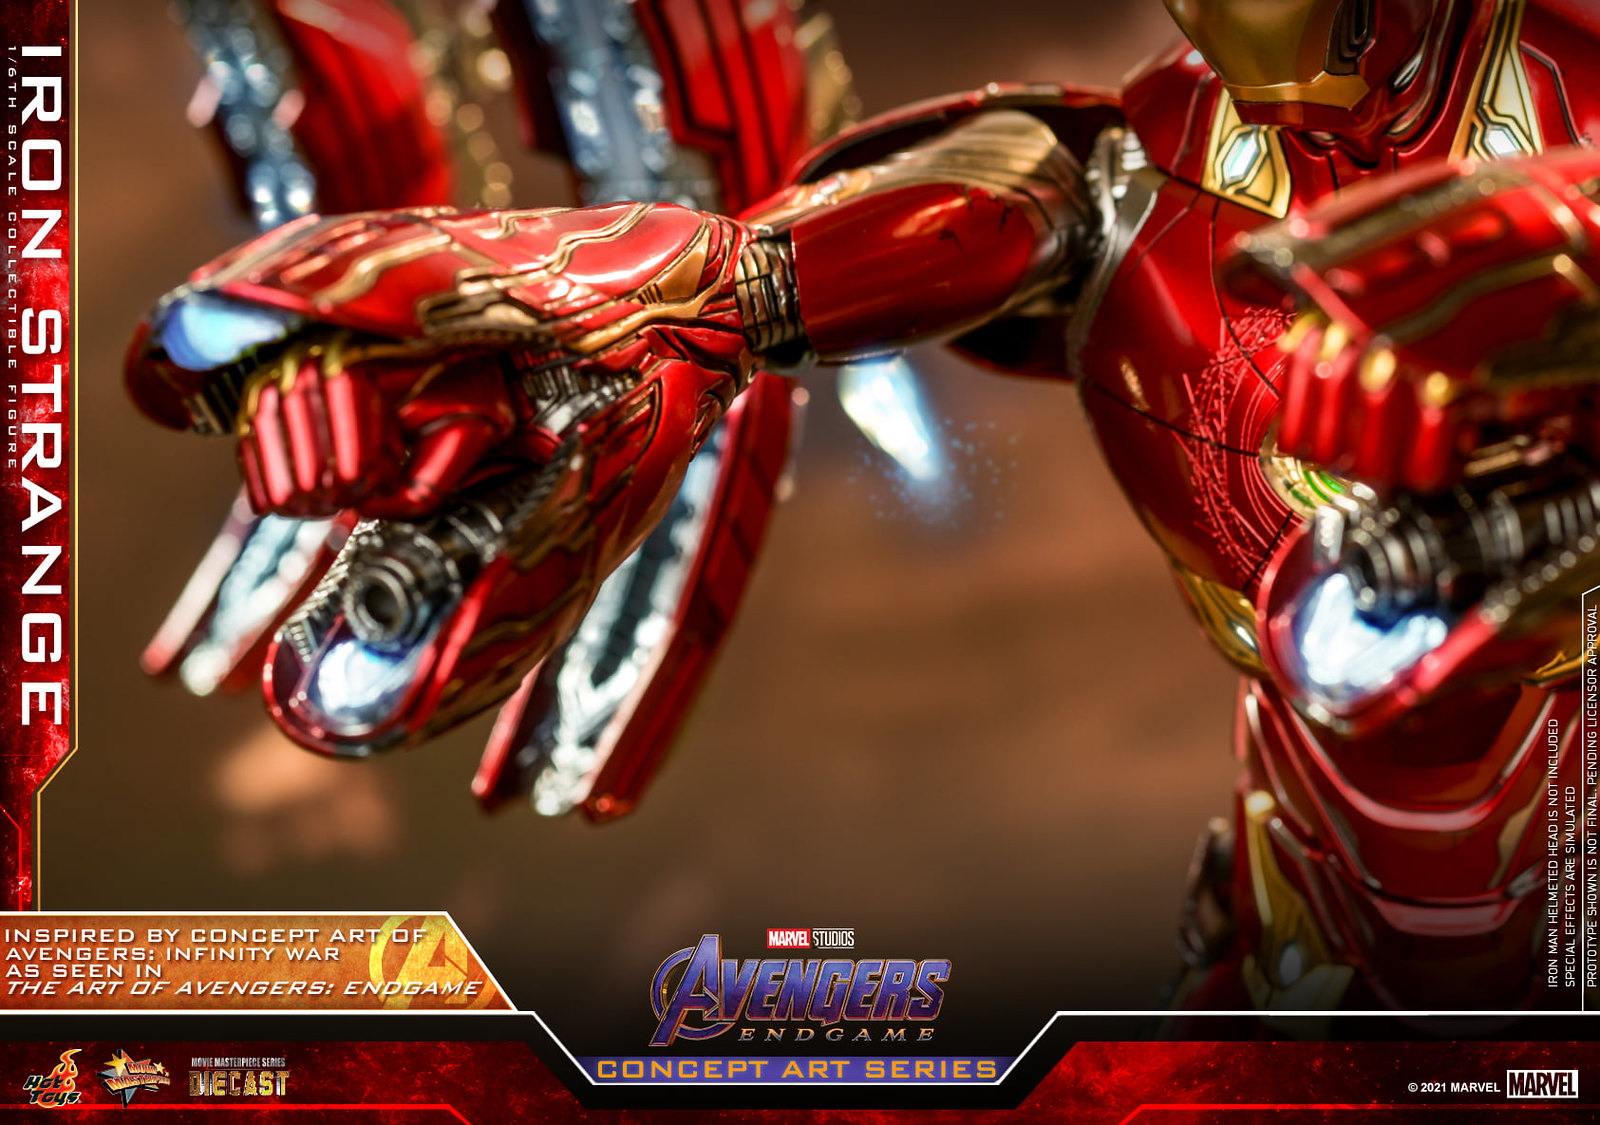 NEW PRODUCT: Hot Toys Avengers: Endgame (Concept Art Series) - 1/6th scale Iron Strange Collectible Figure 51311952074_5abd8ddae3_h